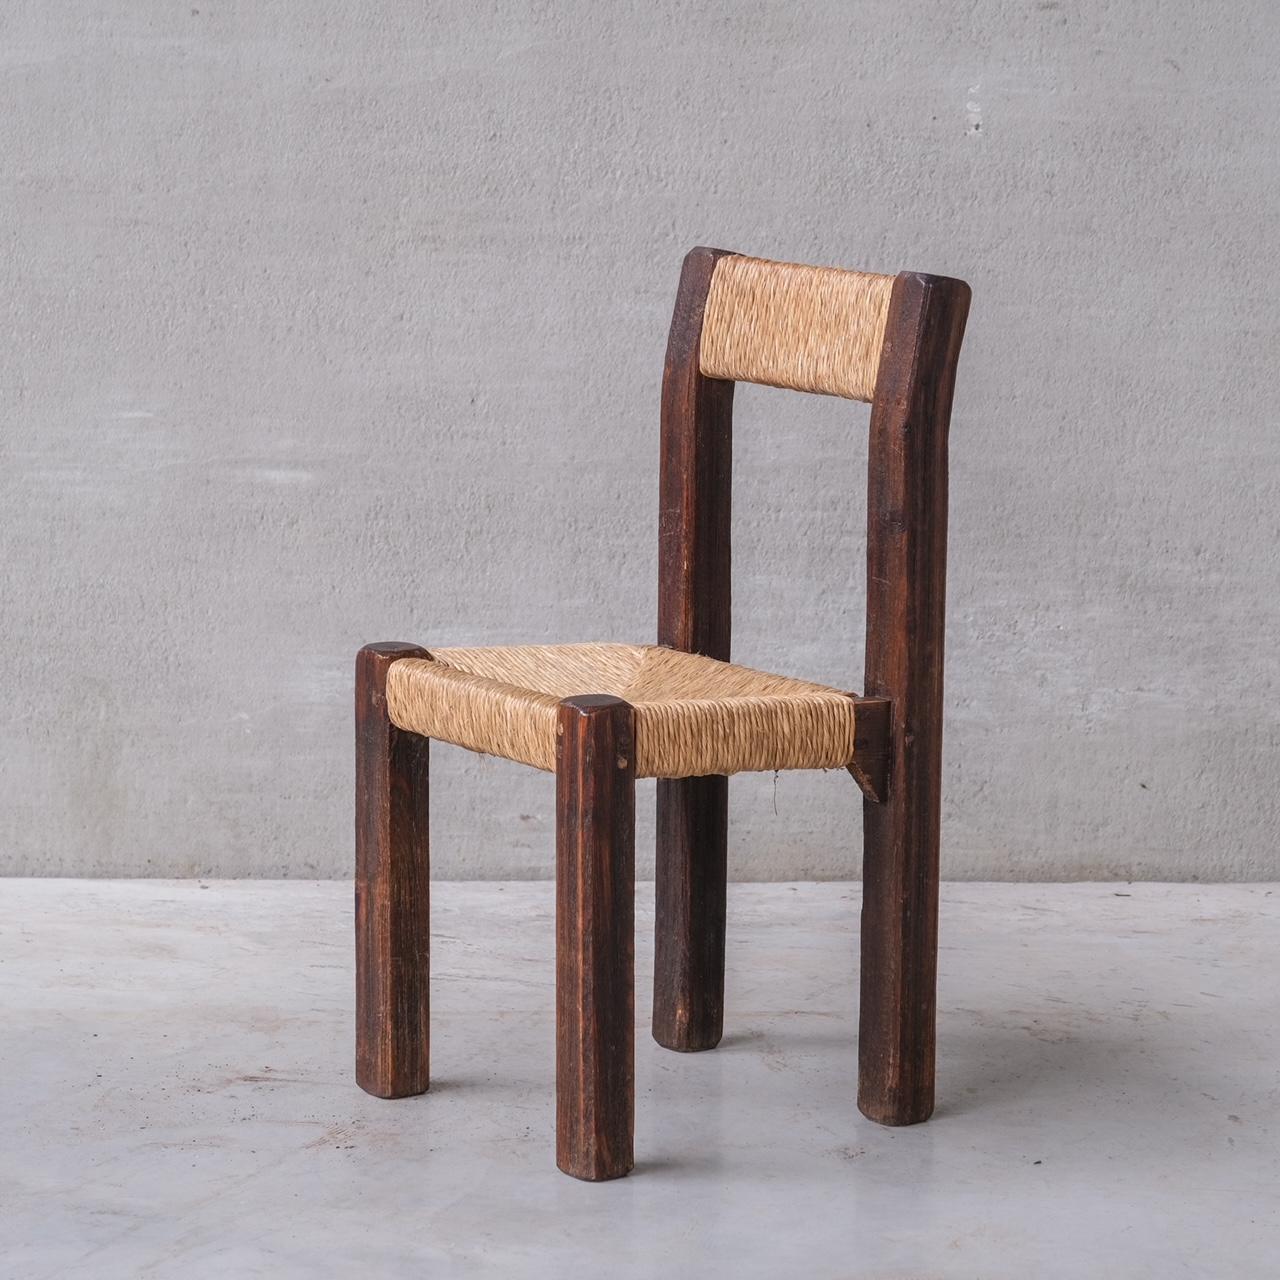 A set of six mid-20th century dining chairs.

Thick chunky wood, likely oak.

French, c1950s.

Good vintage condition, some scuffs and wear commensurate with age.

Internal Ref: 12/9/23/027.

Location: Belgium Gallery.

Dimensions: 42 W x 43 D x 45